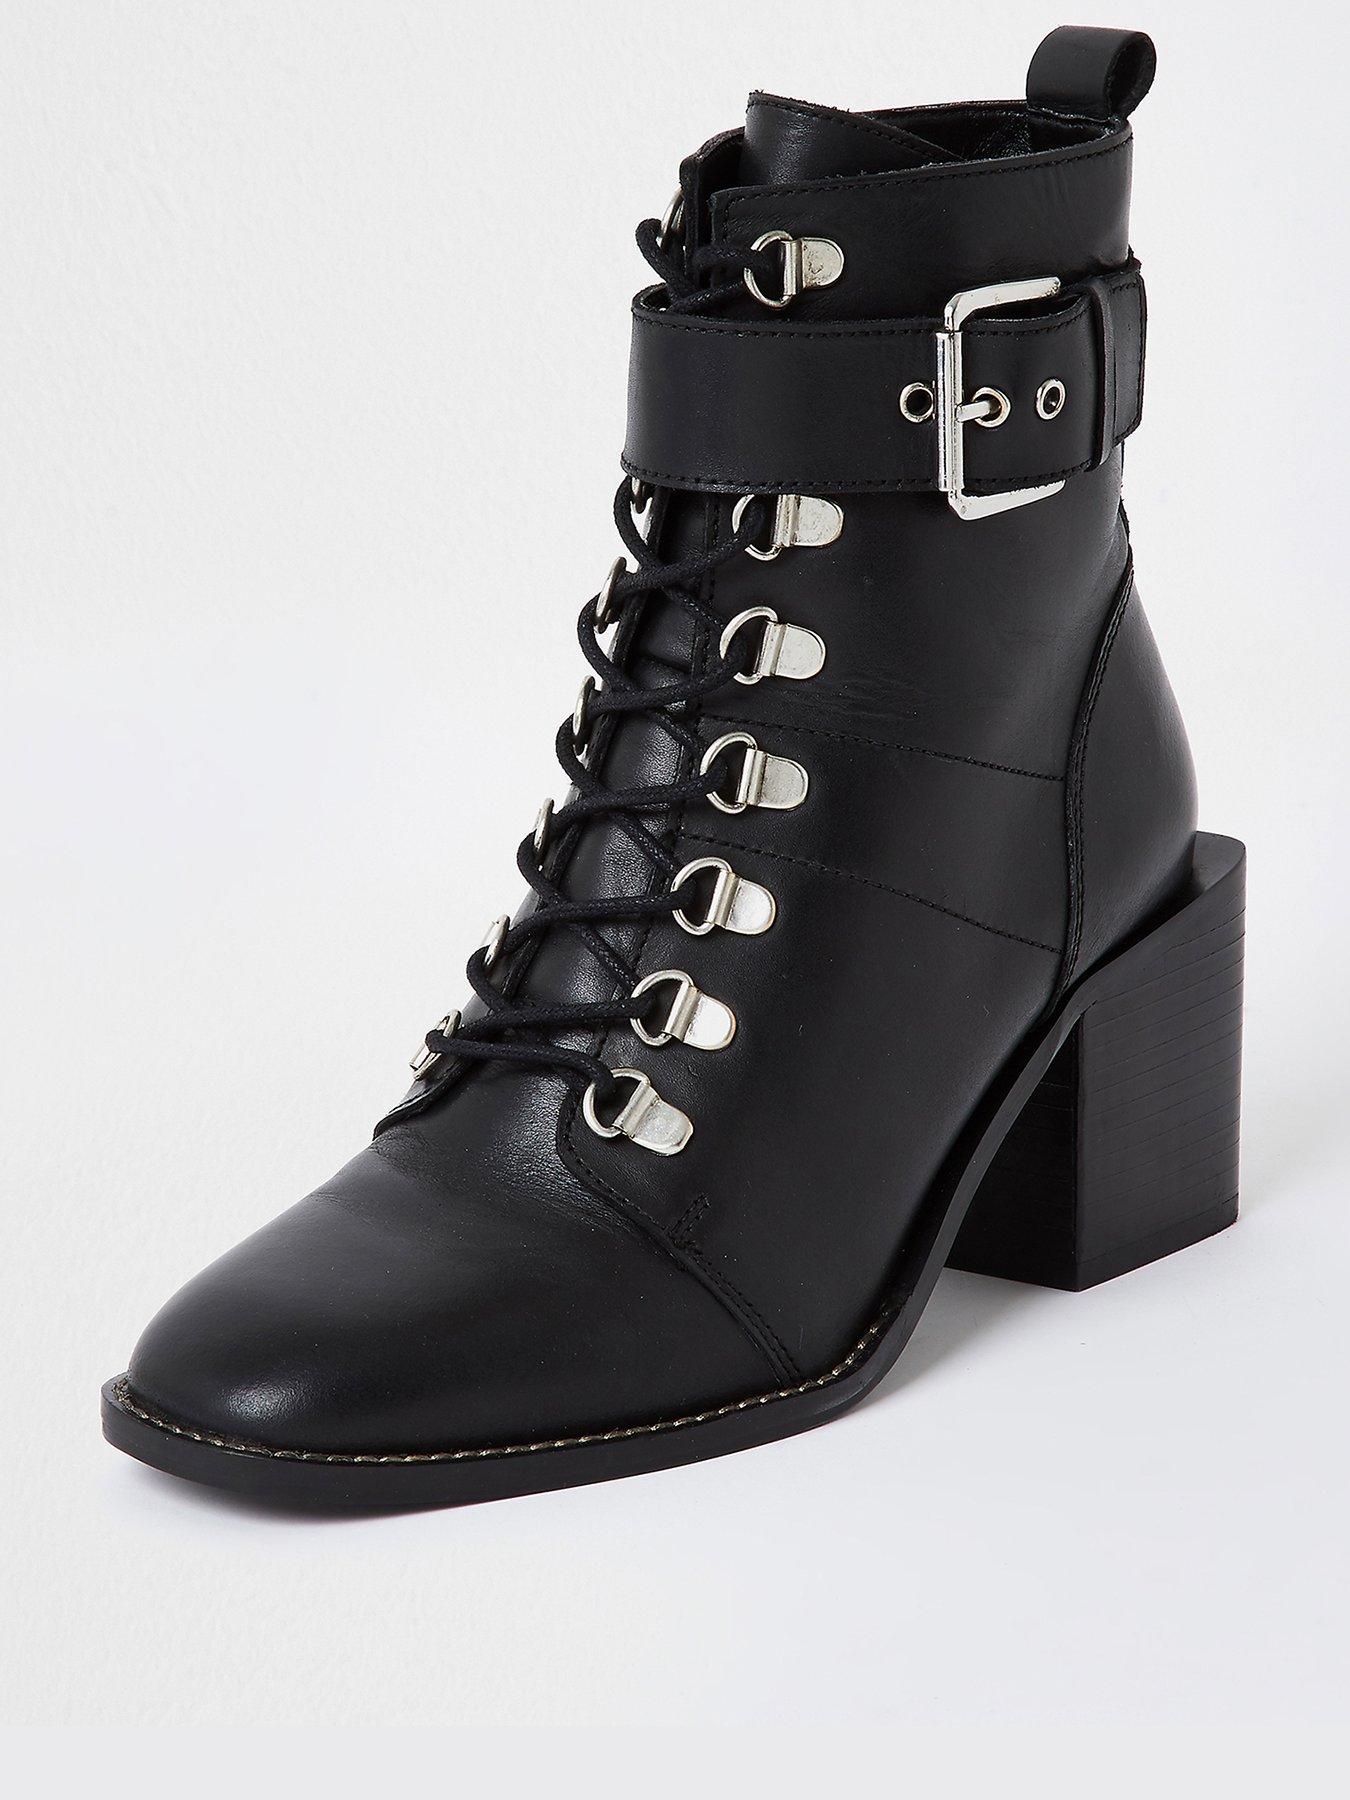 River Island Leather Block Heel Lace Up Boot - Black | very.co.uk